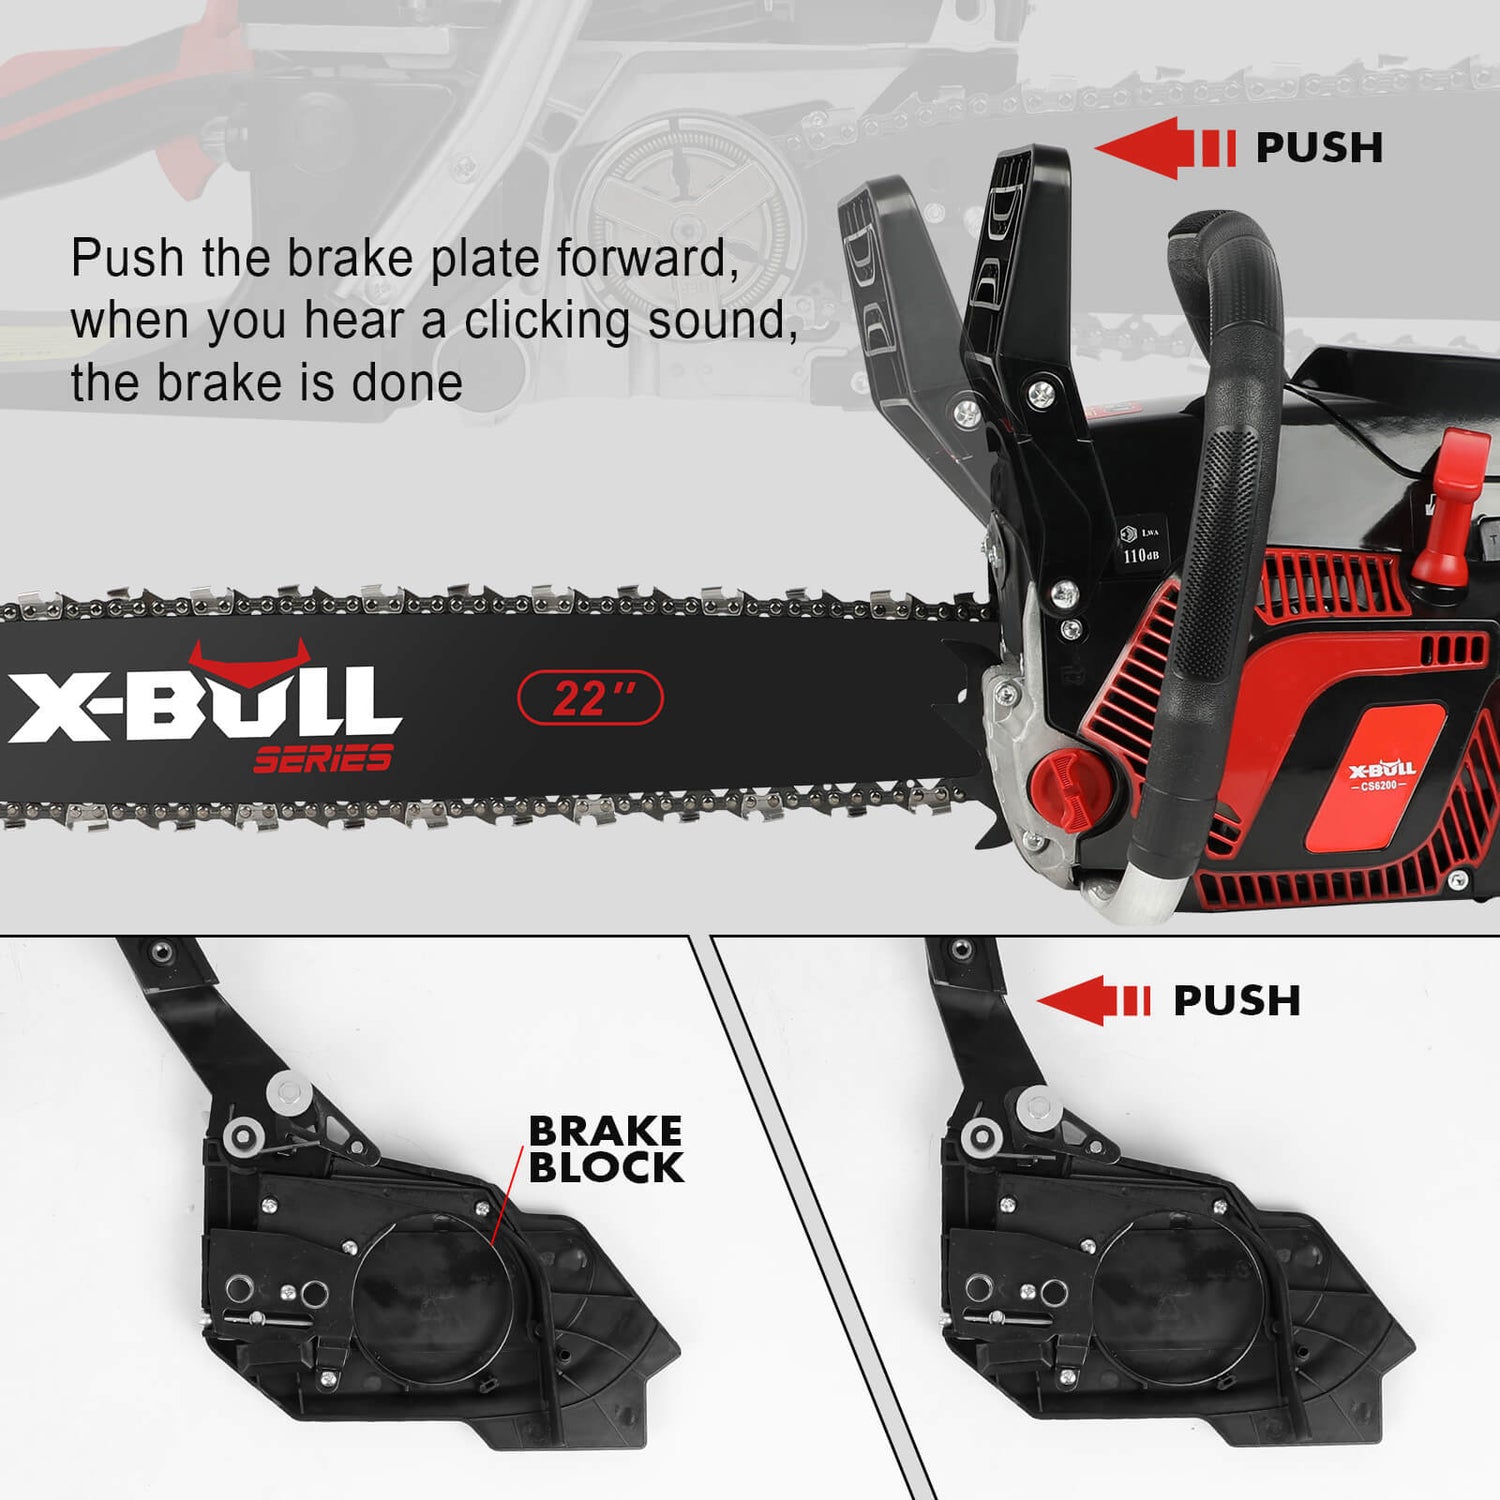 X-BULL| Petrol Chainsaw Commercial 62cc -  22&quot; Bar E-Start Tree Pruning Top Handle